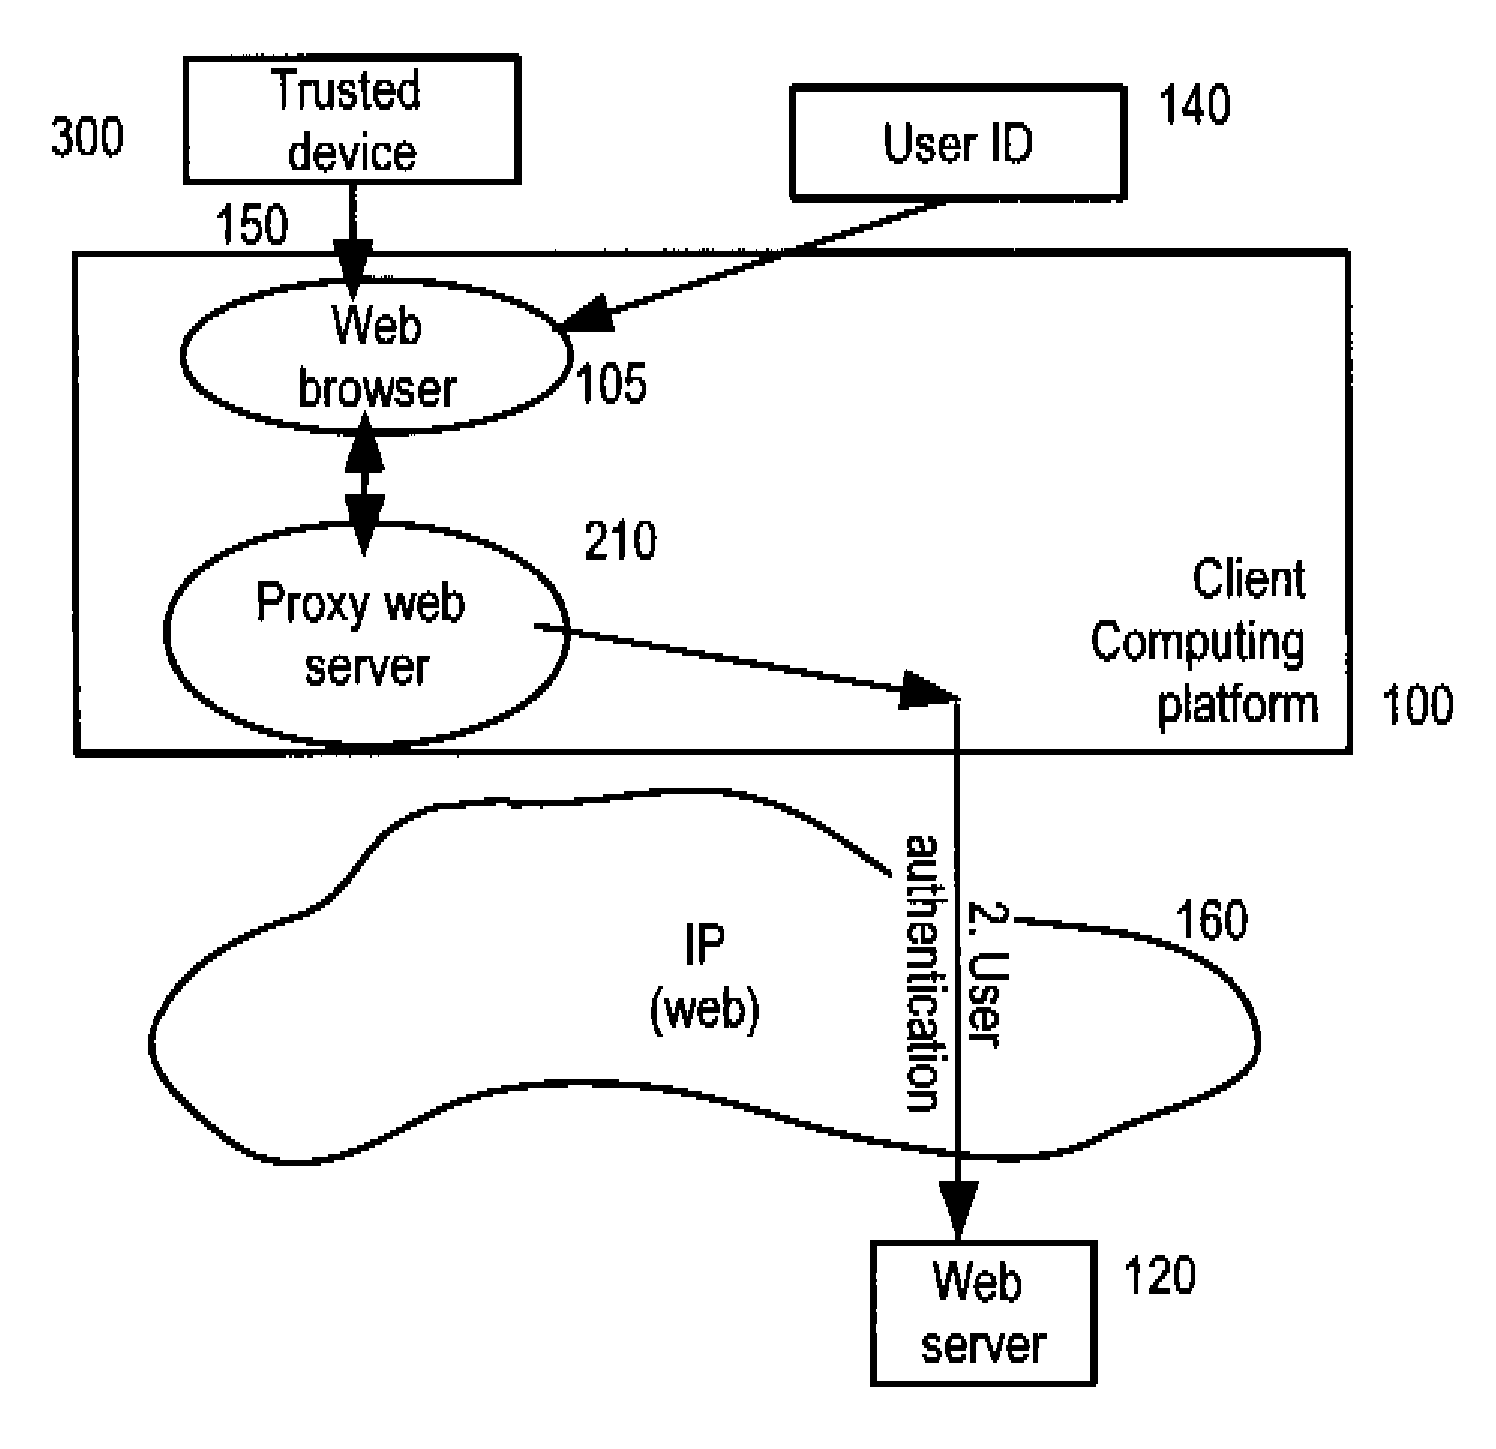 Network transaction verification and authentication